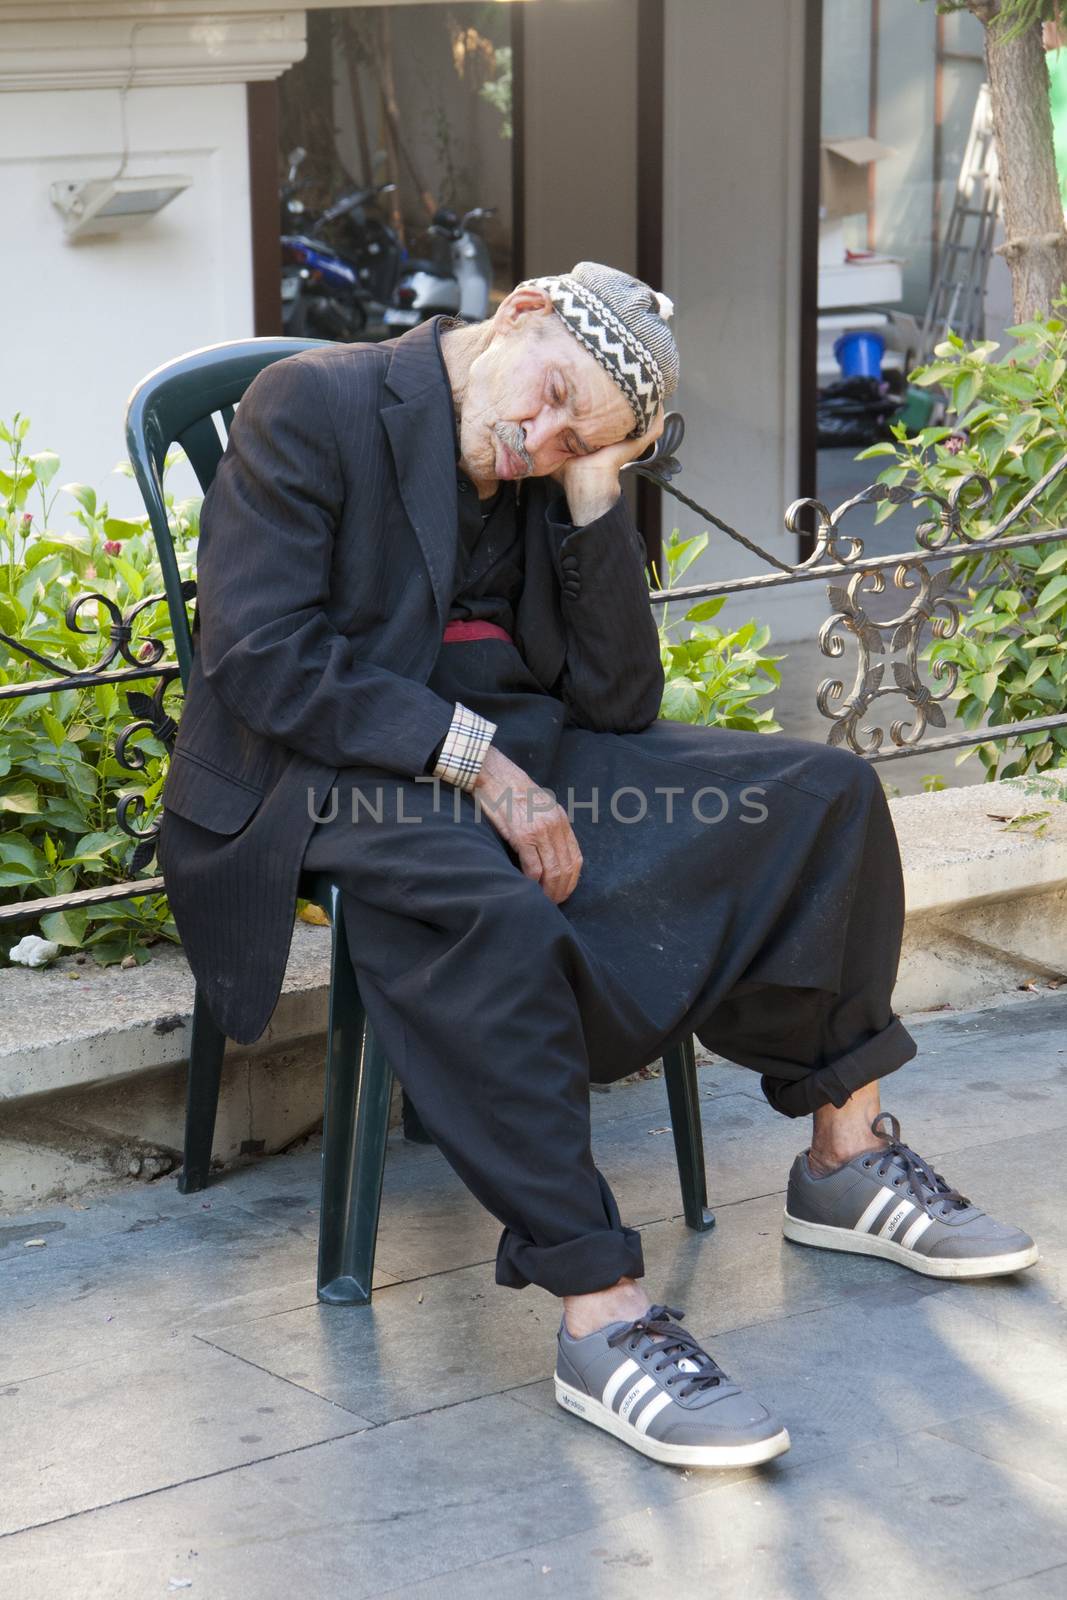 Alanya, Turkey-September 24th 2011: An old man takes a nap on a hot afternoon. It is common in Turkey to see old men taking a nap in the afternoons.